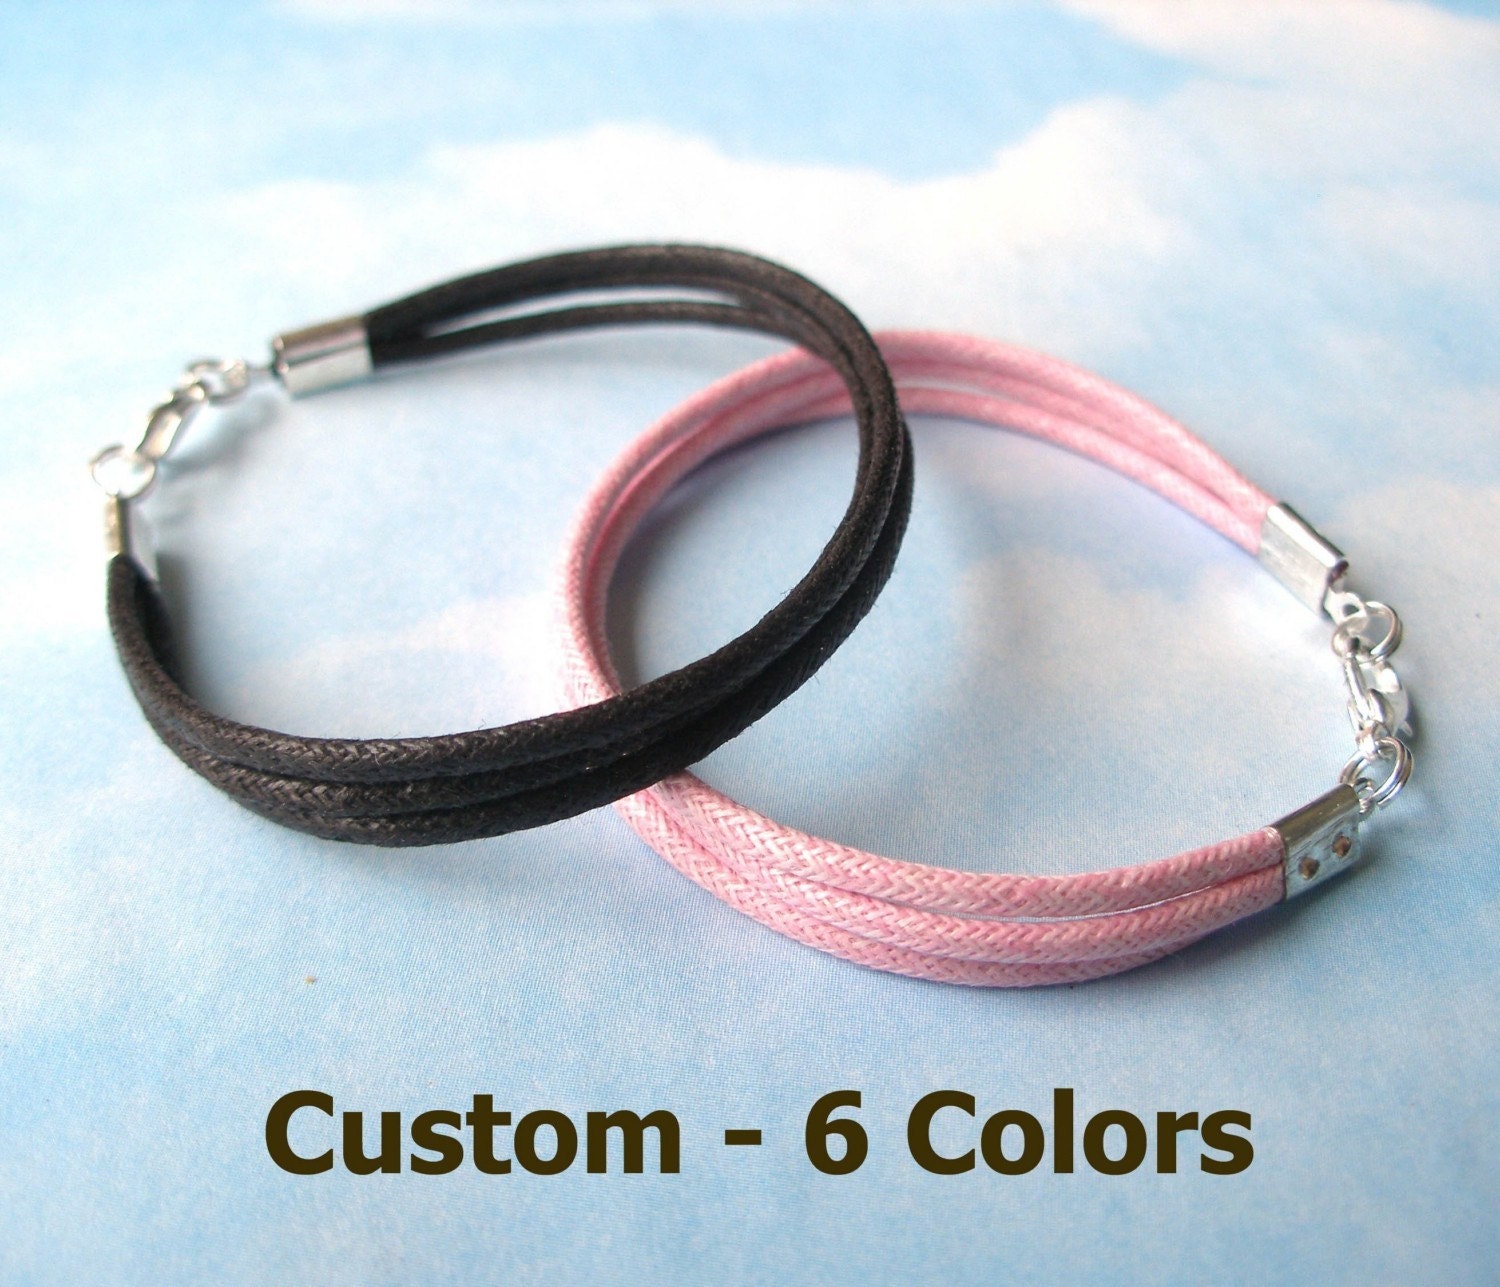 12 - Waxed Cotton Bracelets - Custom - Any length, 6 colors. Great Party Favors